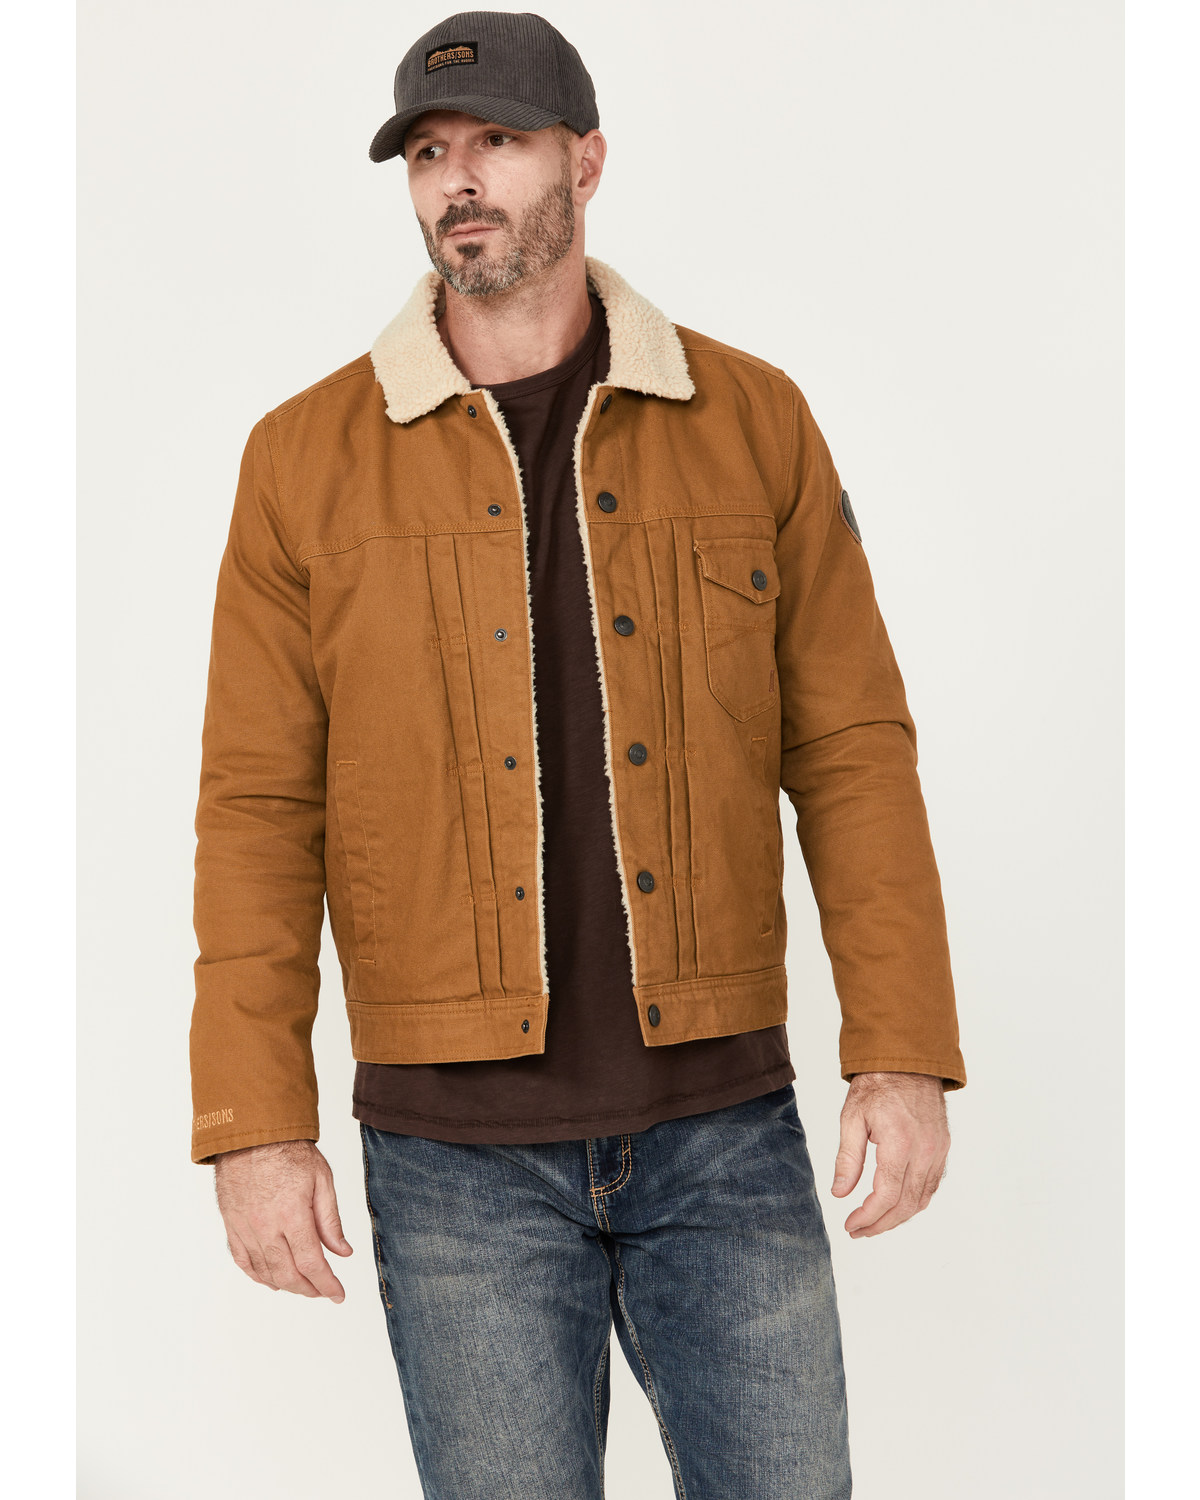 Brothers and Sons Men's Sherpa Lined Canvas Jacket